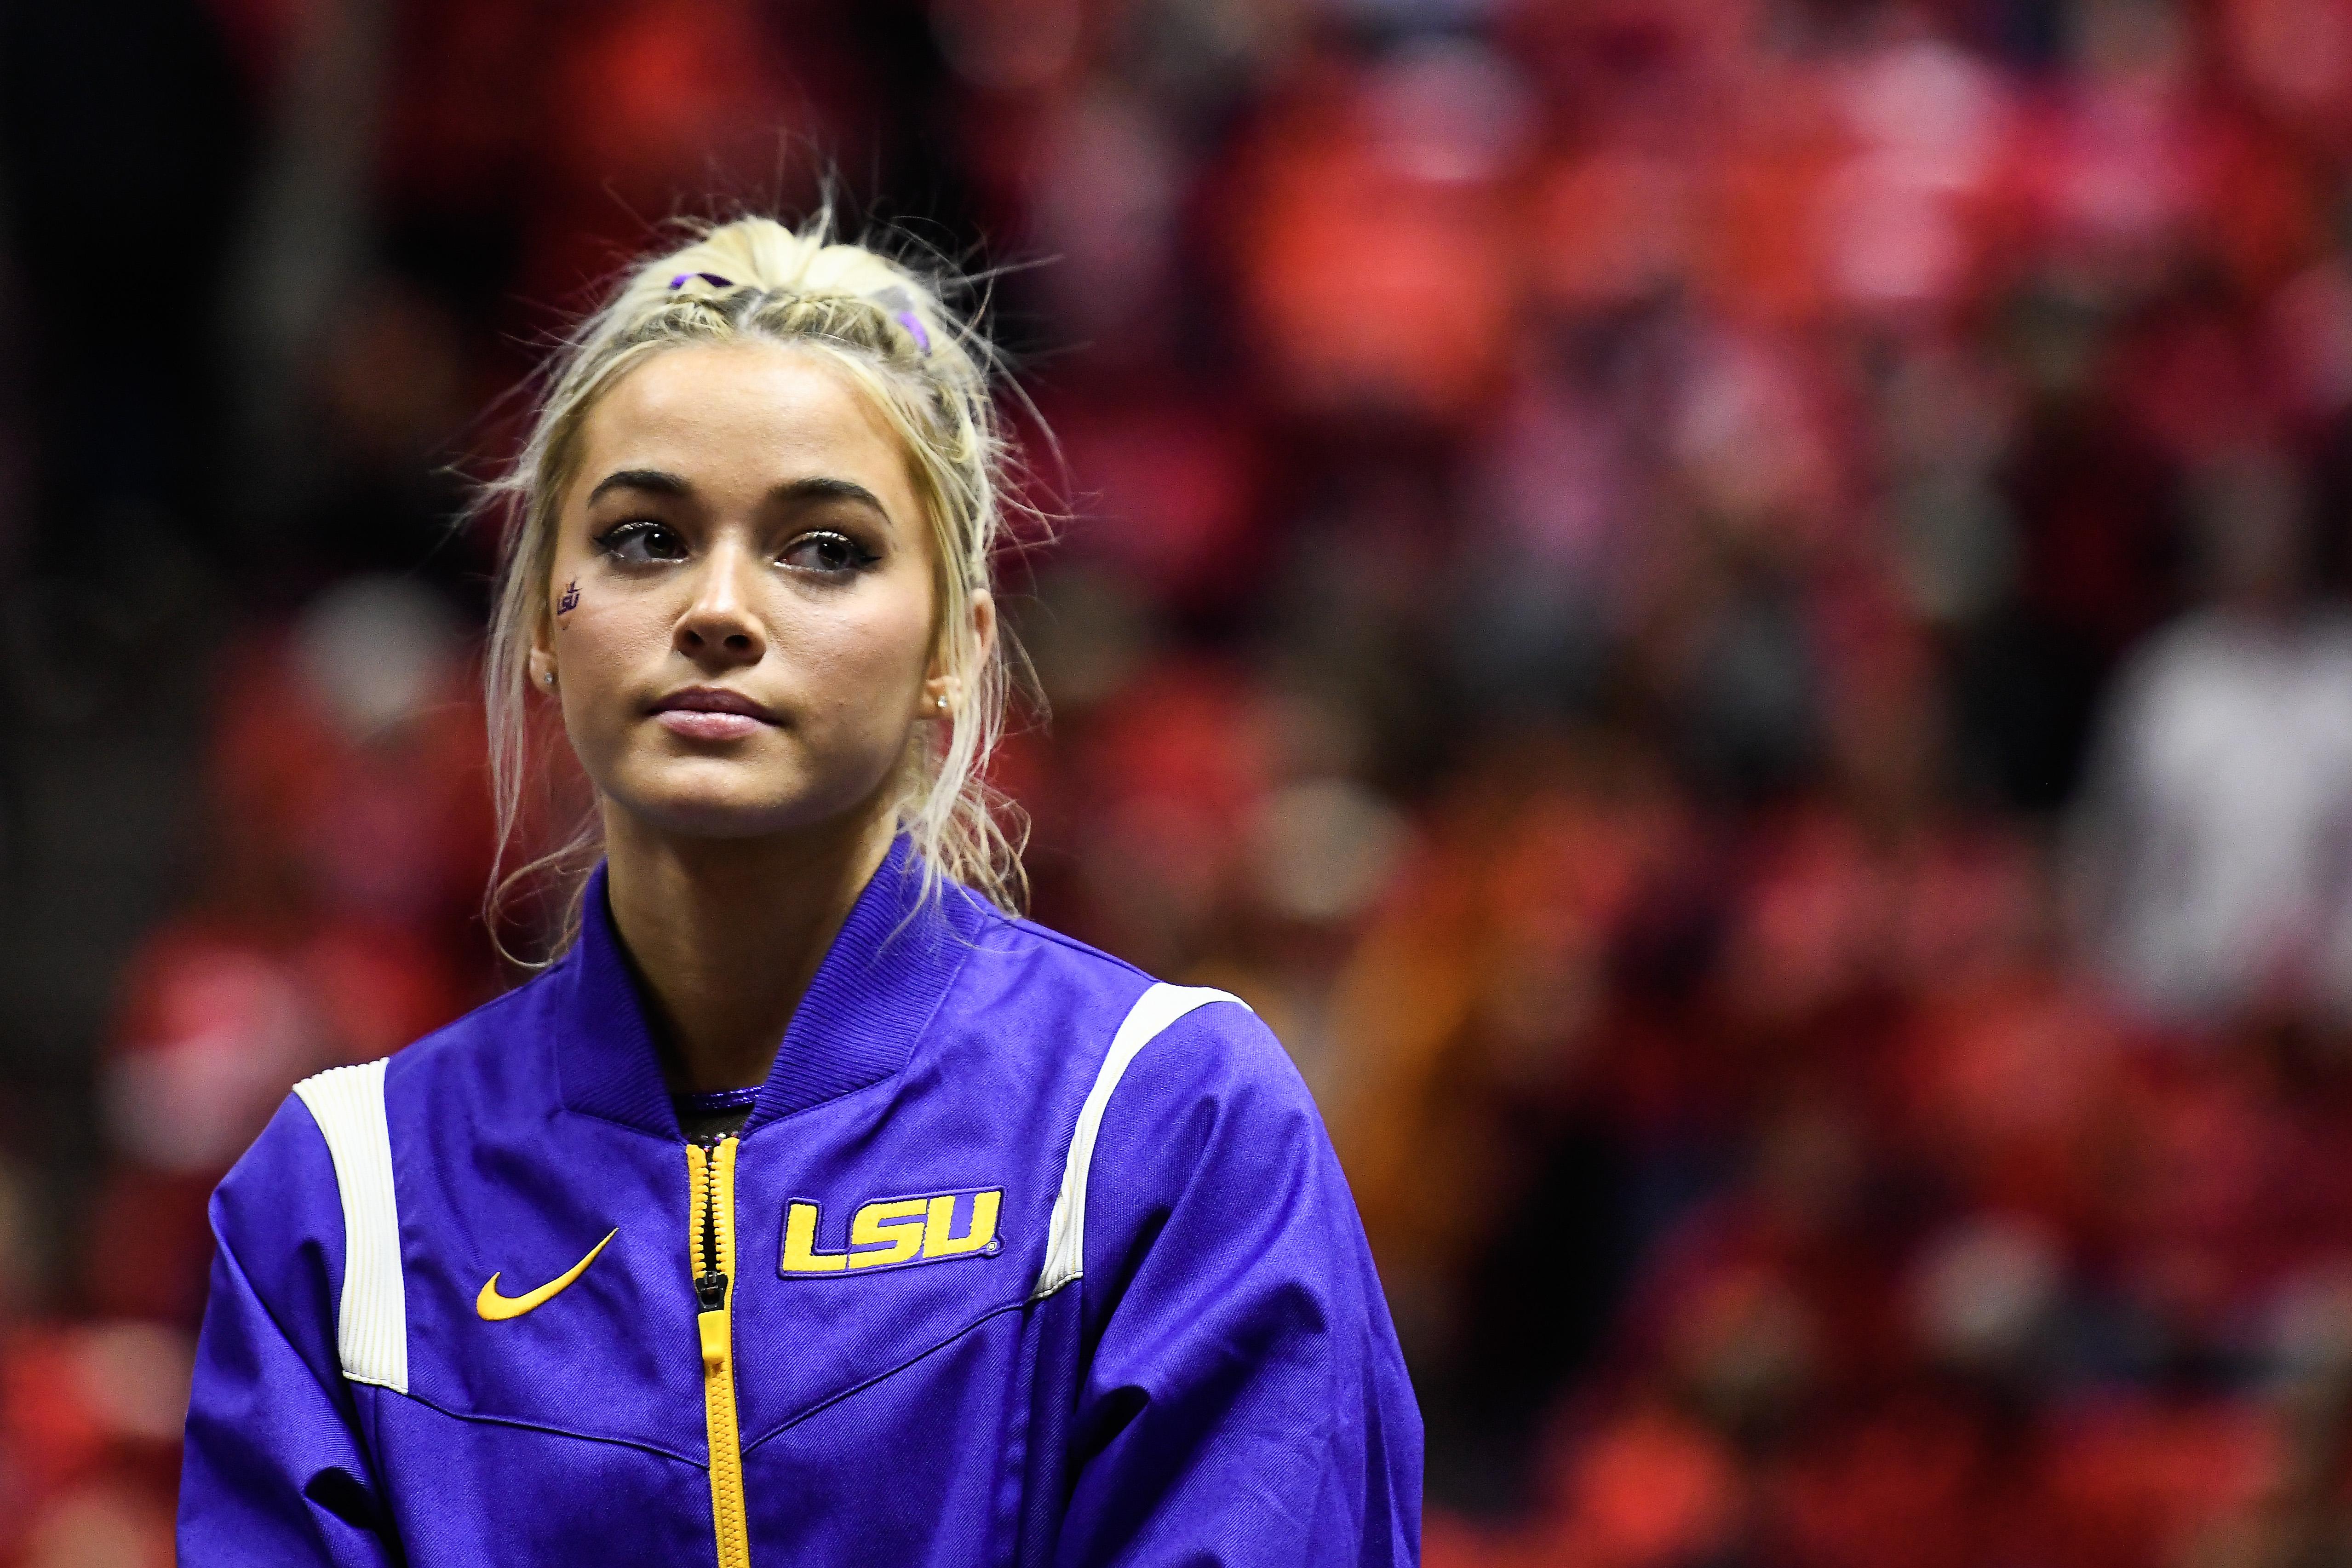 Olivia Dunne, LSU gymnastics and TikTok star, and her disconcerting teen boy fans, explained. photo